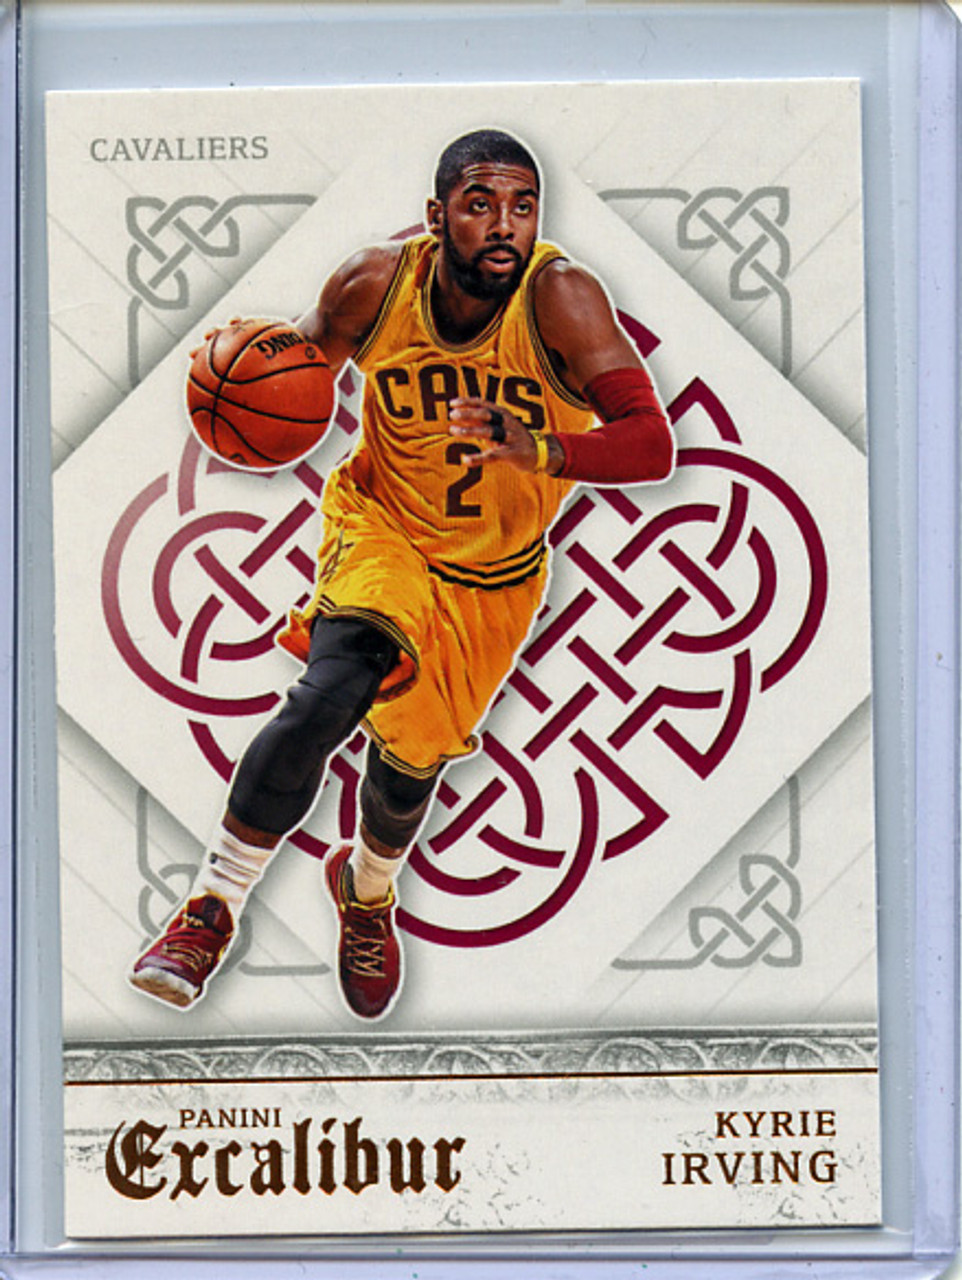 Kyrie Irving 2015-16 Excalibur #53